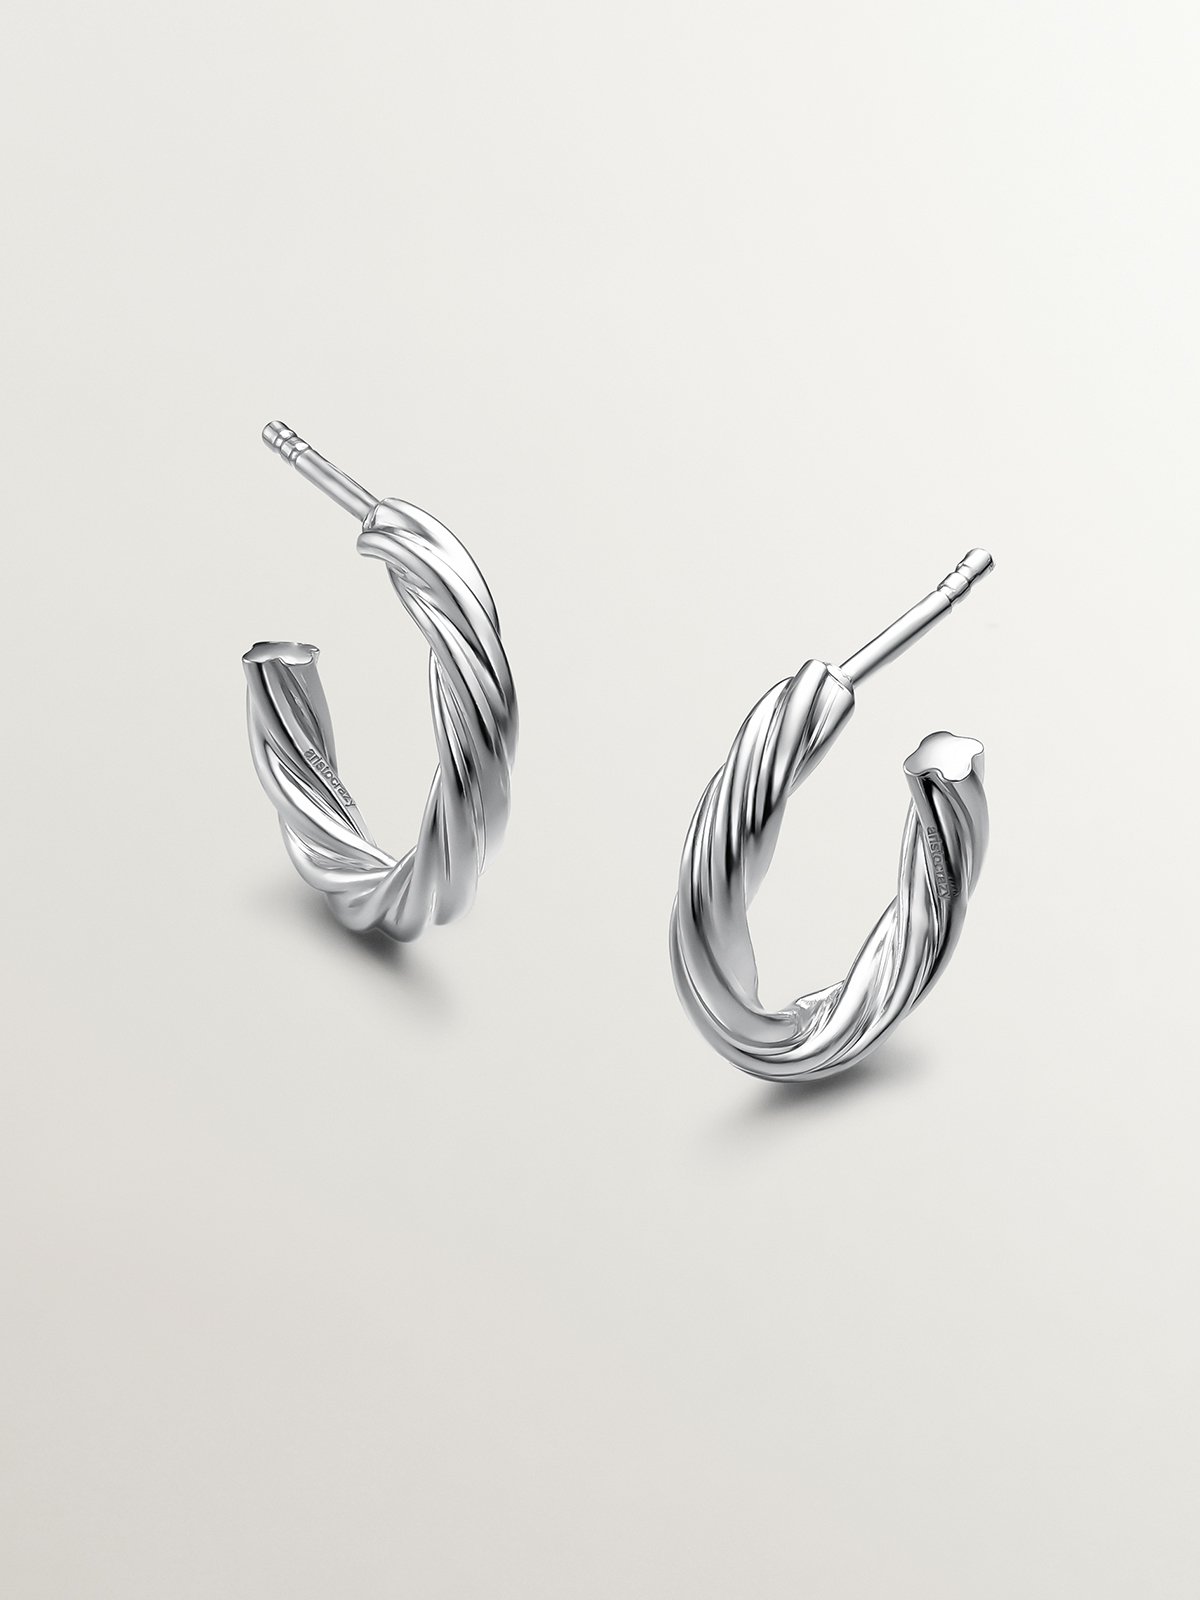 925 Silver hoop earrings with gallooned finish.